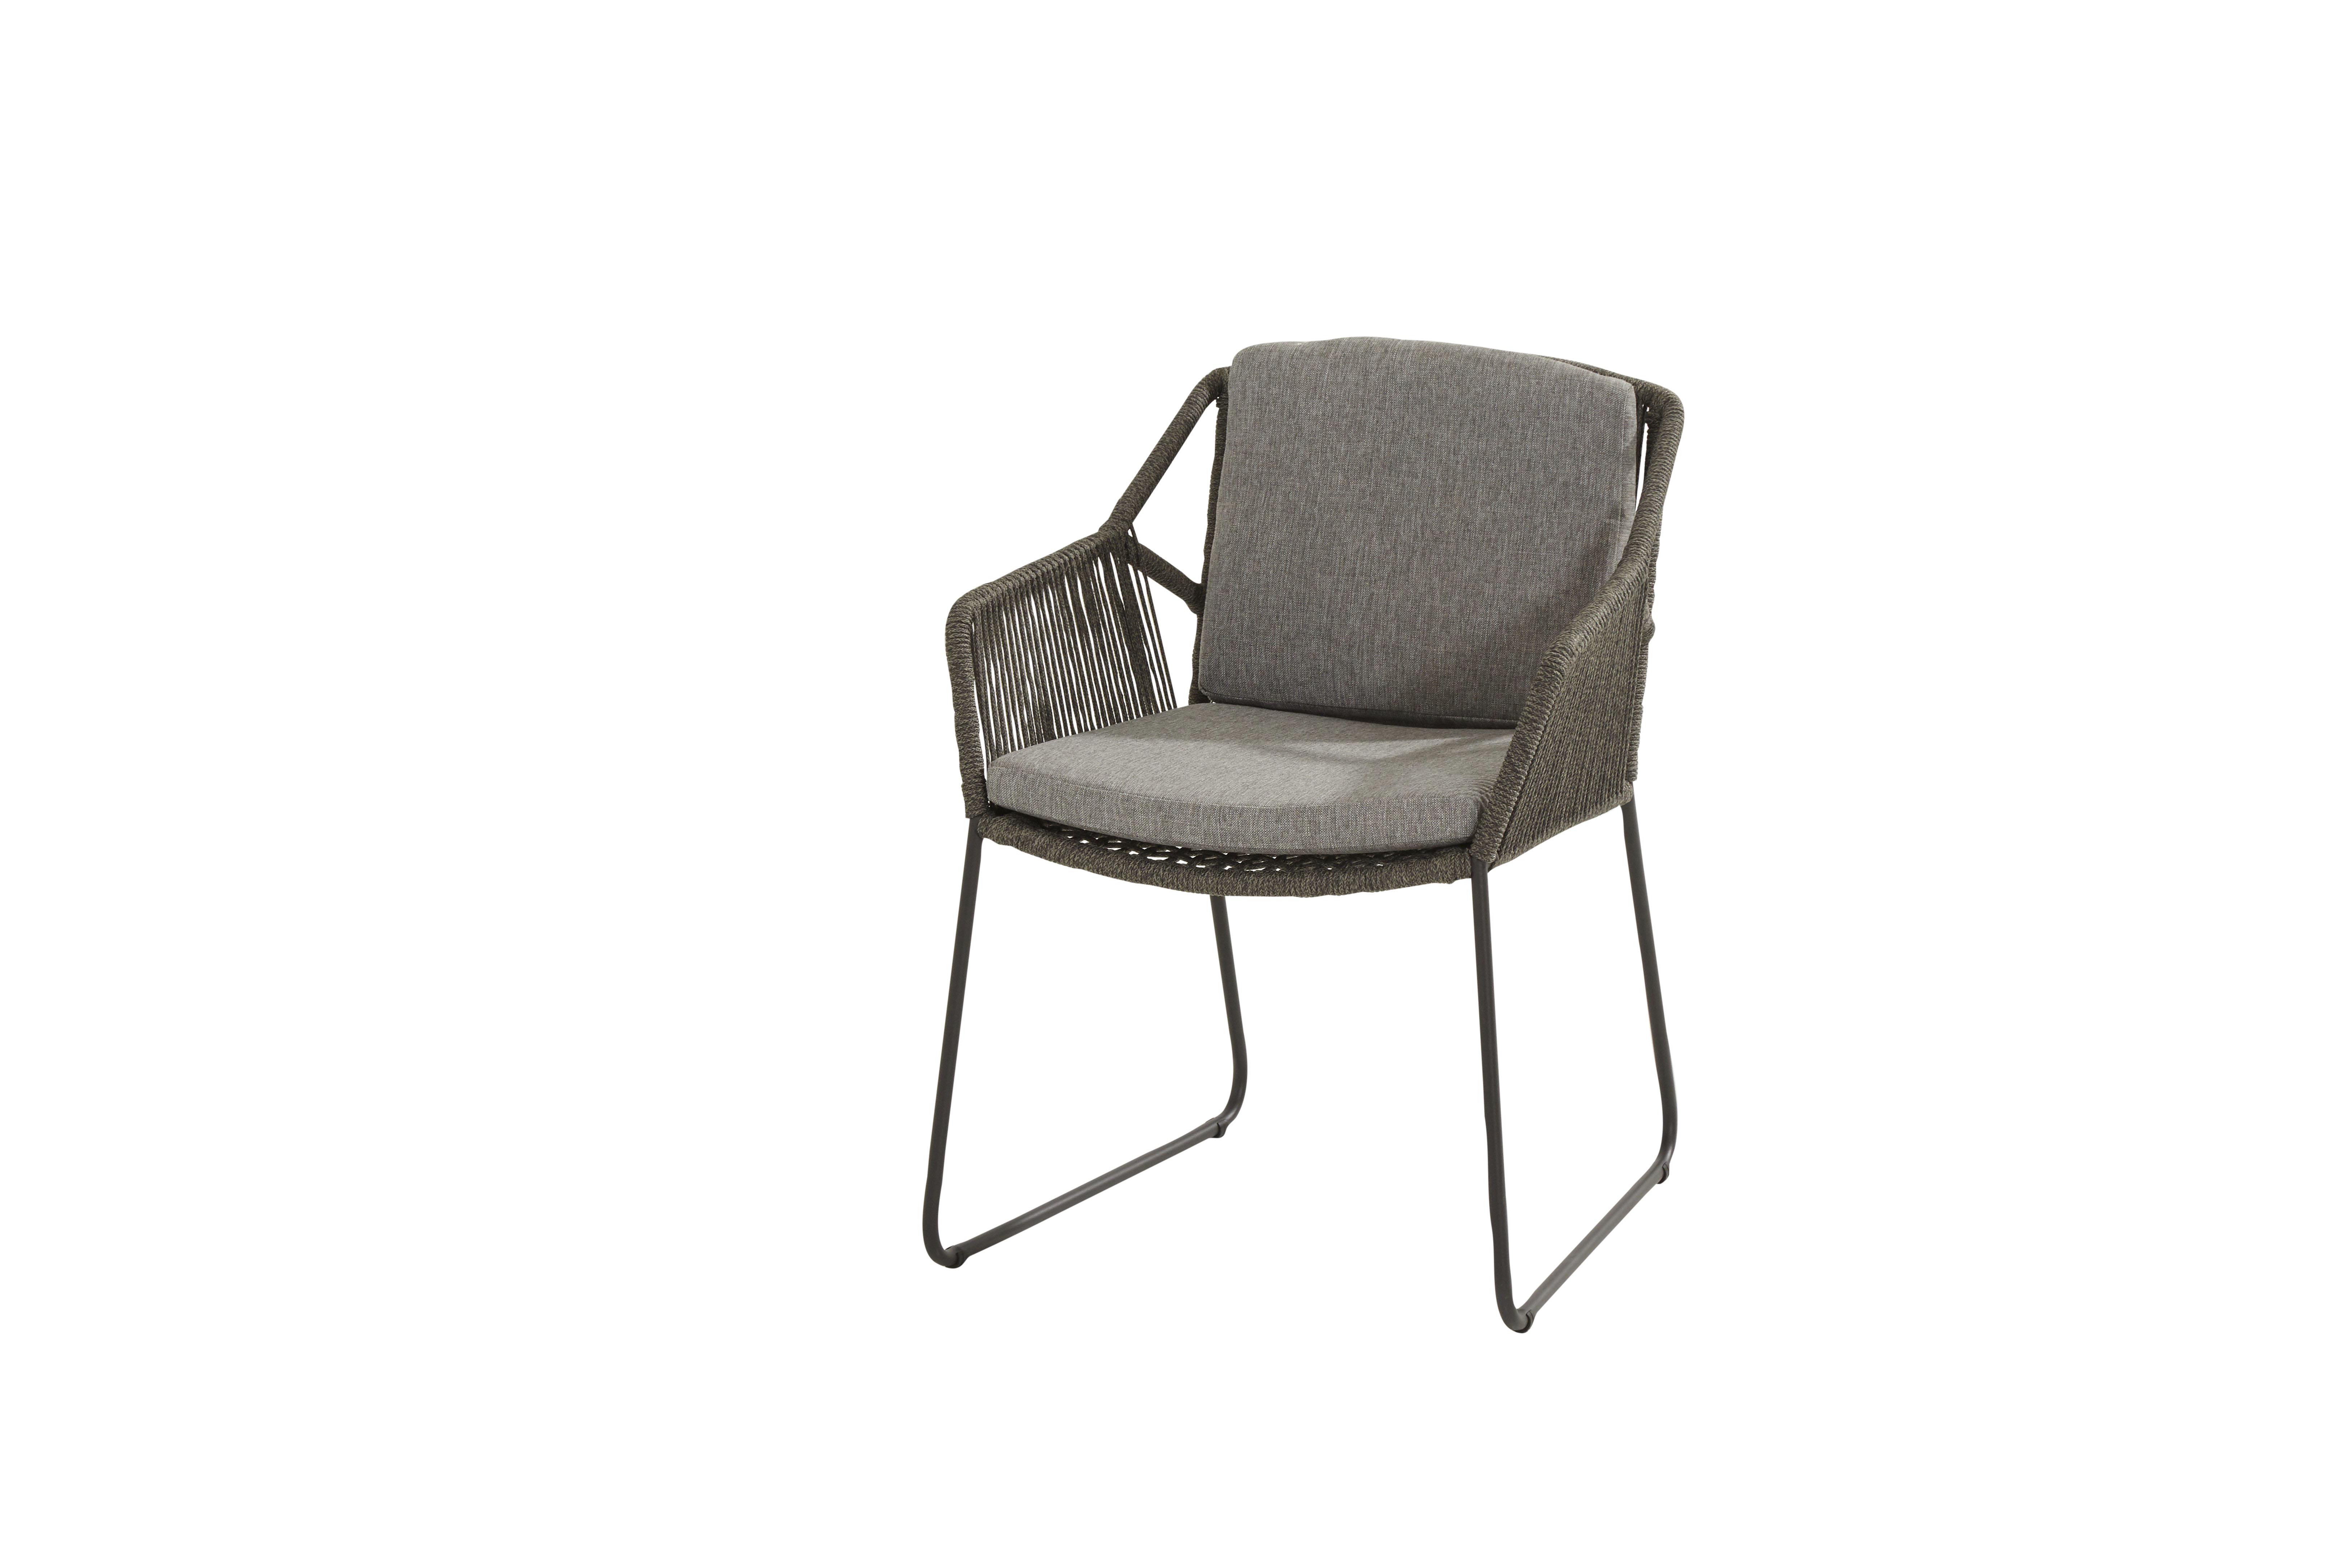 213519_ Accor dining chair Mid Grey with 2 cushions 01-1